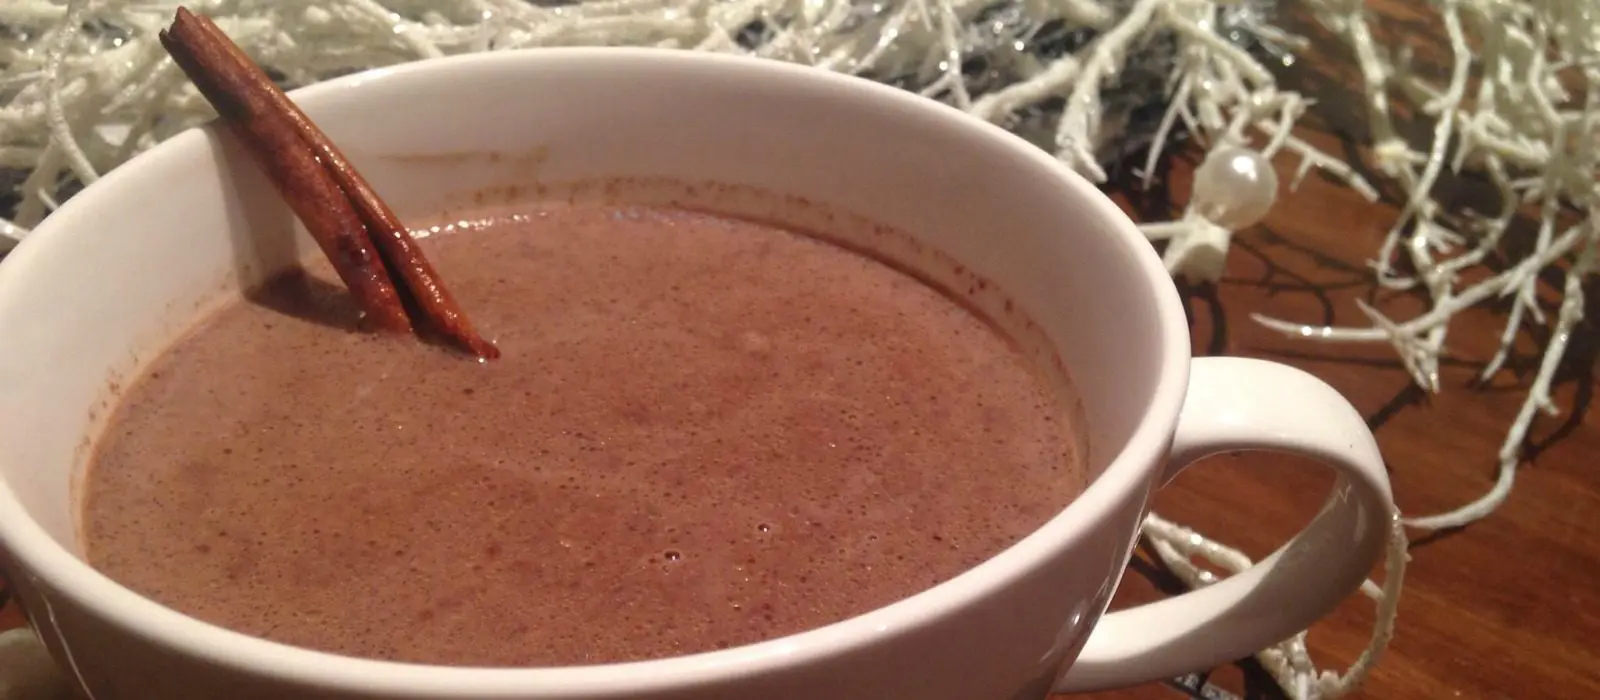 Cinnamon Hot Chocolate in the Slow Cooker